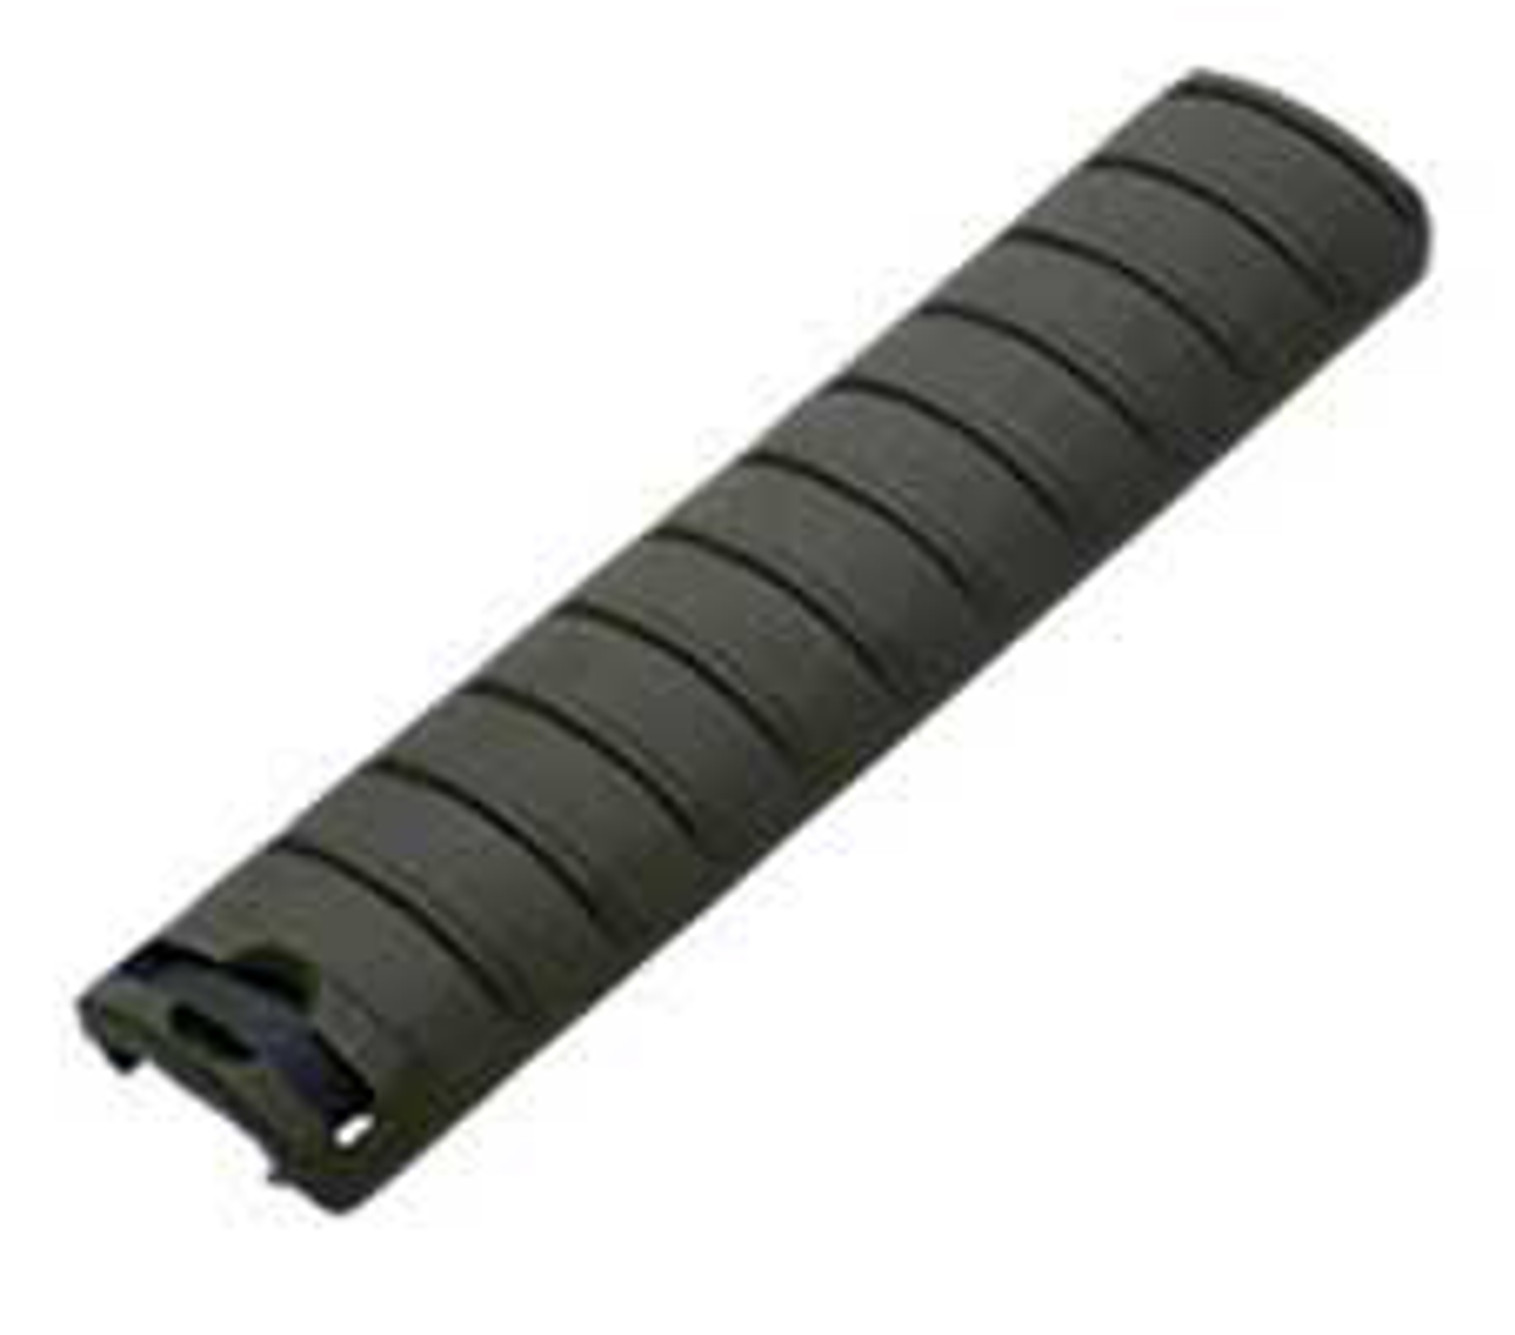 Special Force Tactical Hand Guard Rail Cover Pancel for Airsoft - One (OD)